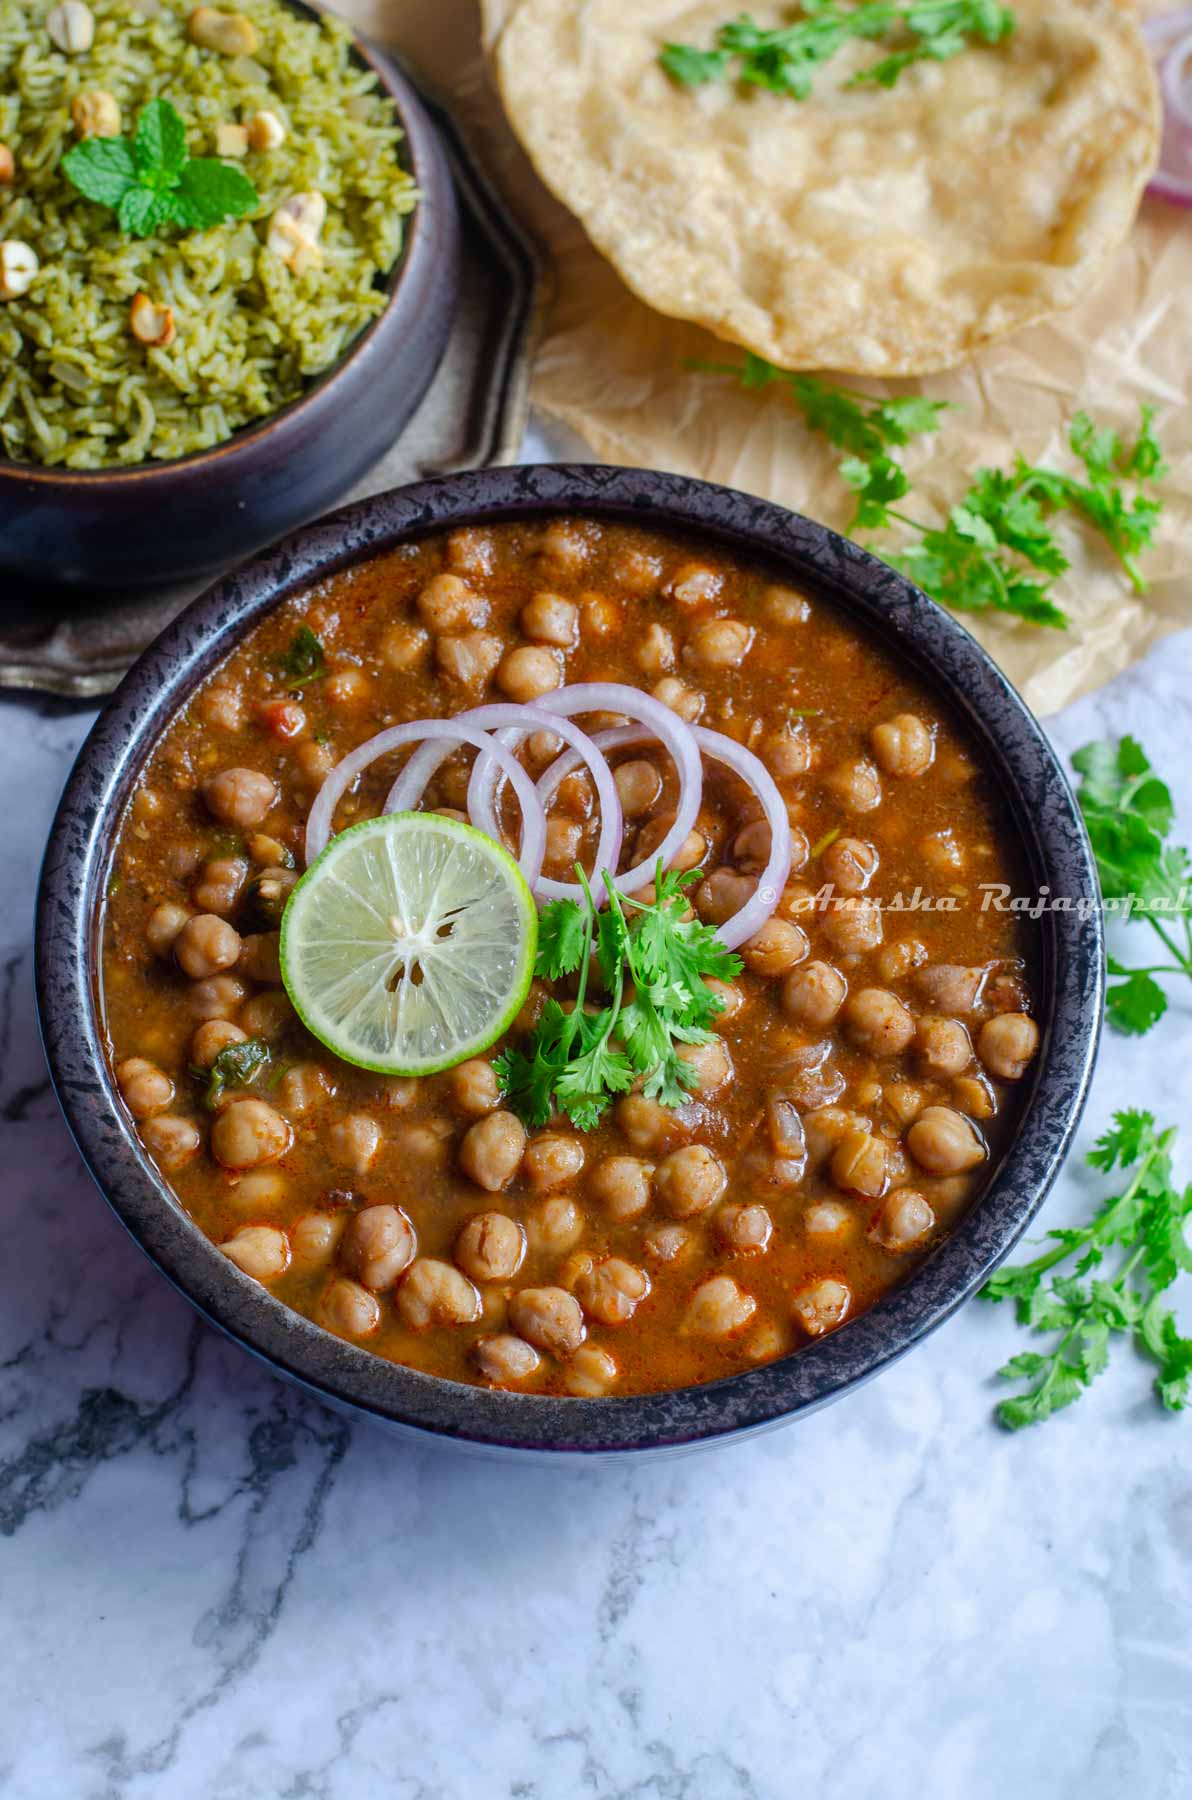 Instant pot channa masala topped with onion rings, a slice of lemon and cilantro leaves in a black bowl. The bowl is placed on a marbled surface. Pooris and a mint pilaf at the back ground. Cilantro strewn all over.